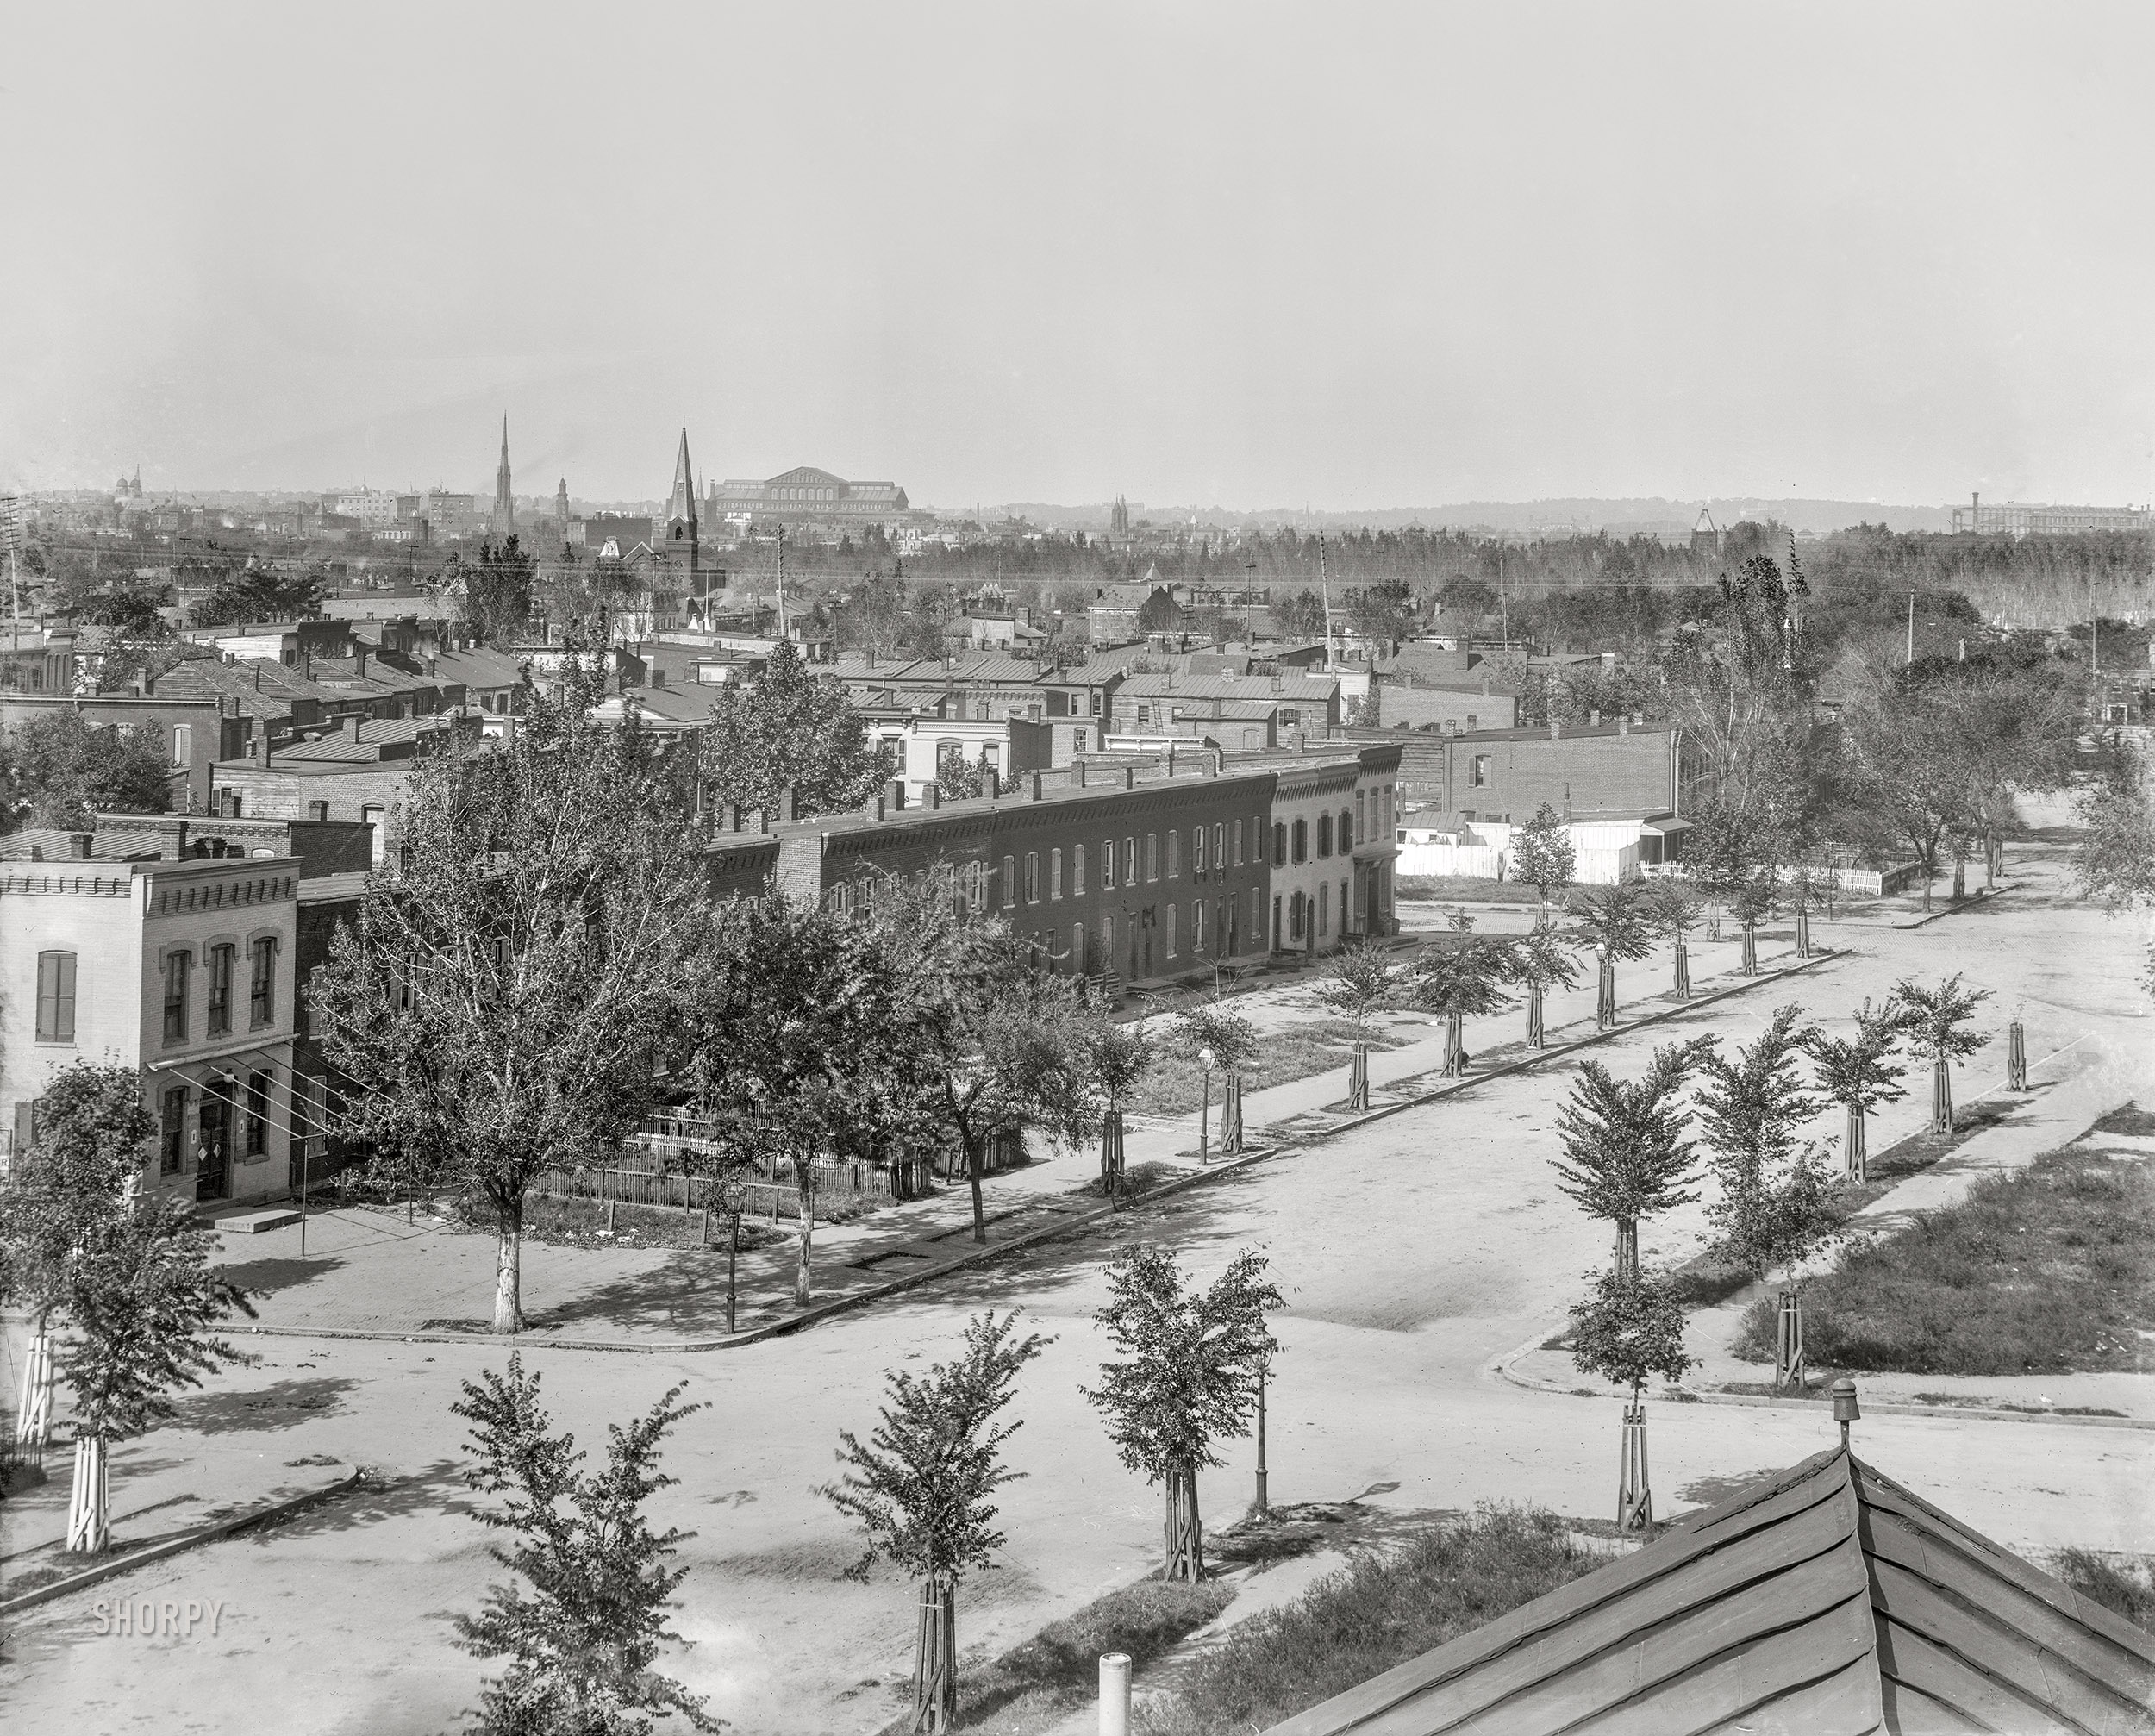 Washington, D.C., circa 1901. "An elevated view of Delaware Avenue S.W. between H & G streets from the Randall School." Large structure on the horizon is the Pension Office, now the National Building Museum. 8x10 glass negative, D.C. Street Survey Collection. View full size.